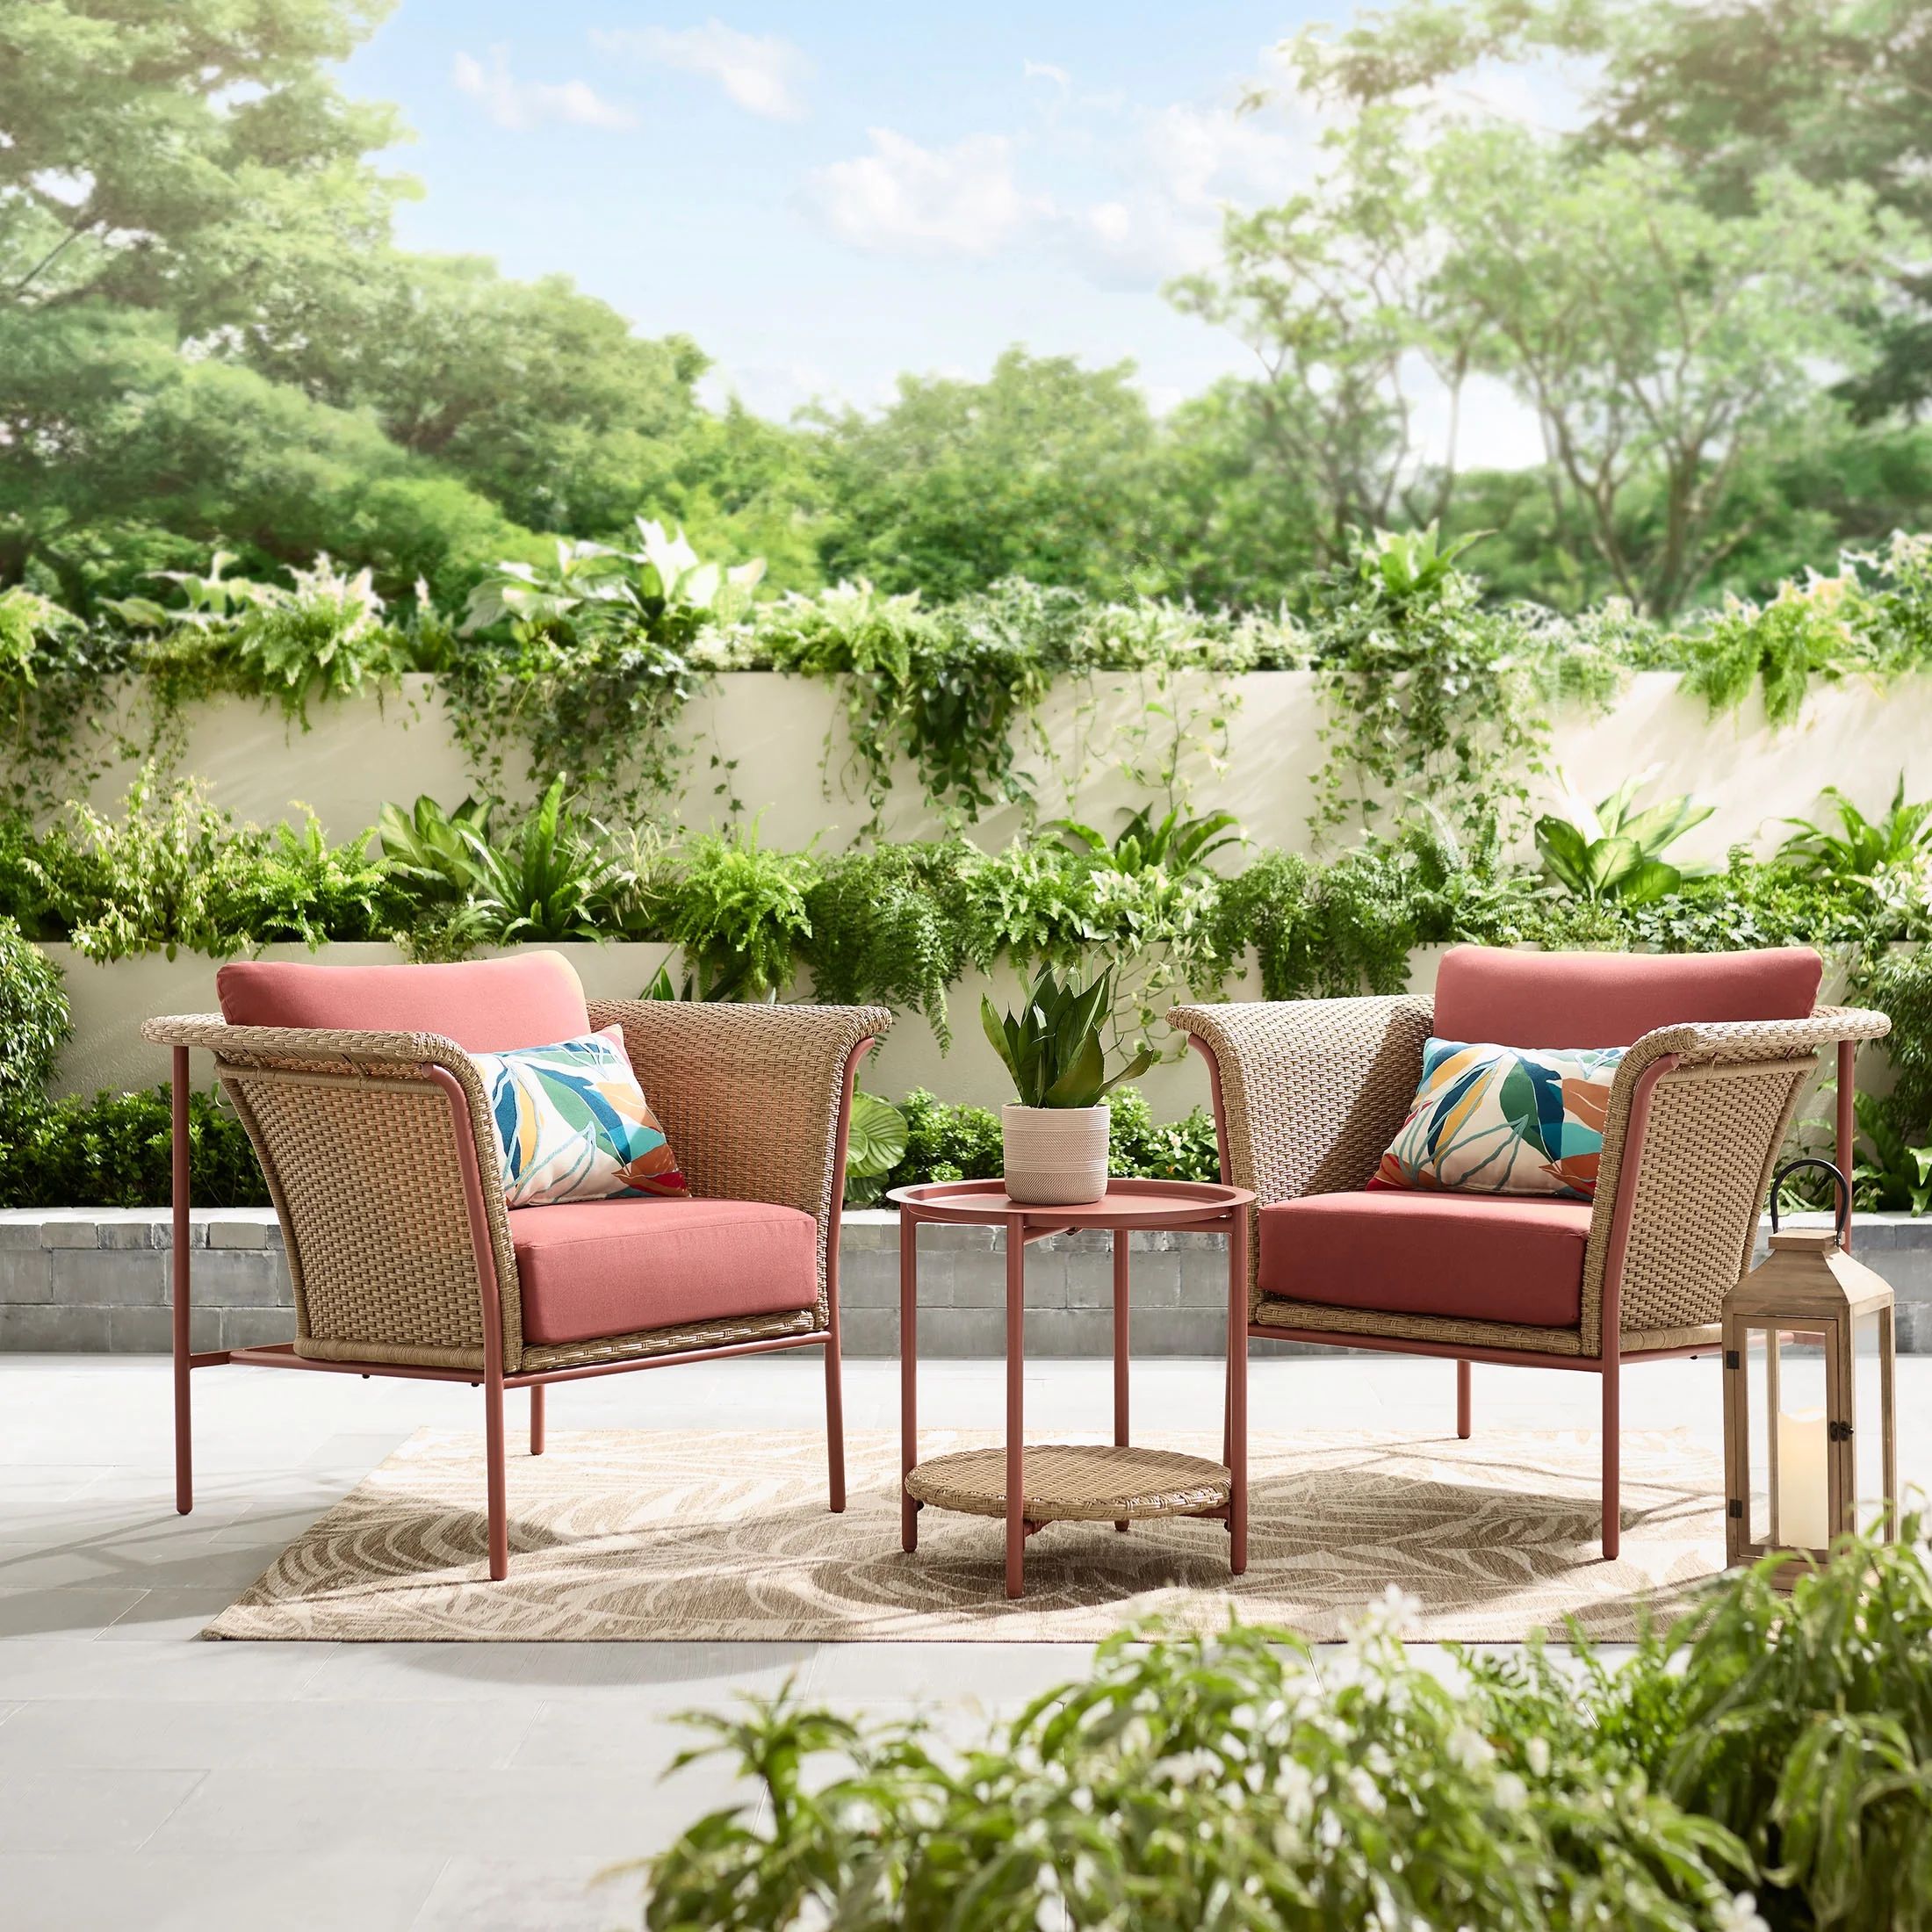 Better Homes & Gardens Trezza 3-Piece Steel and Wicker Outdoor Chat Set with Cushions, Red | Walmart (US)